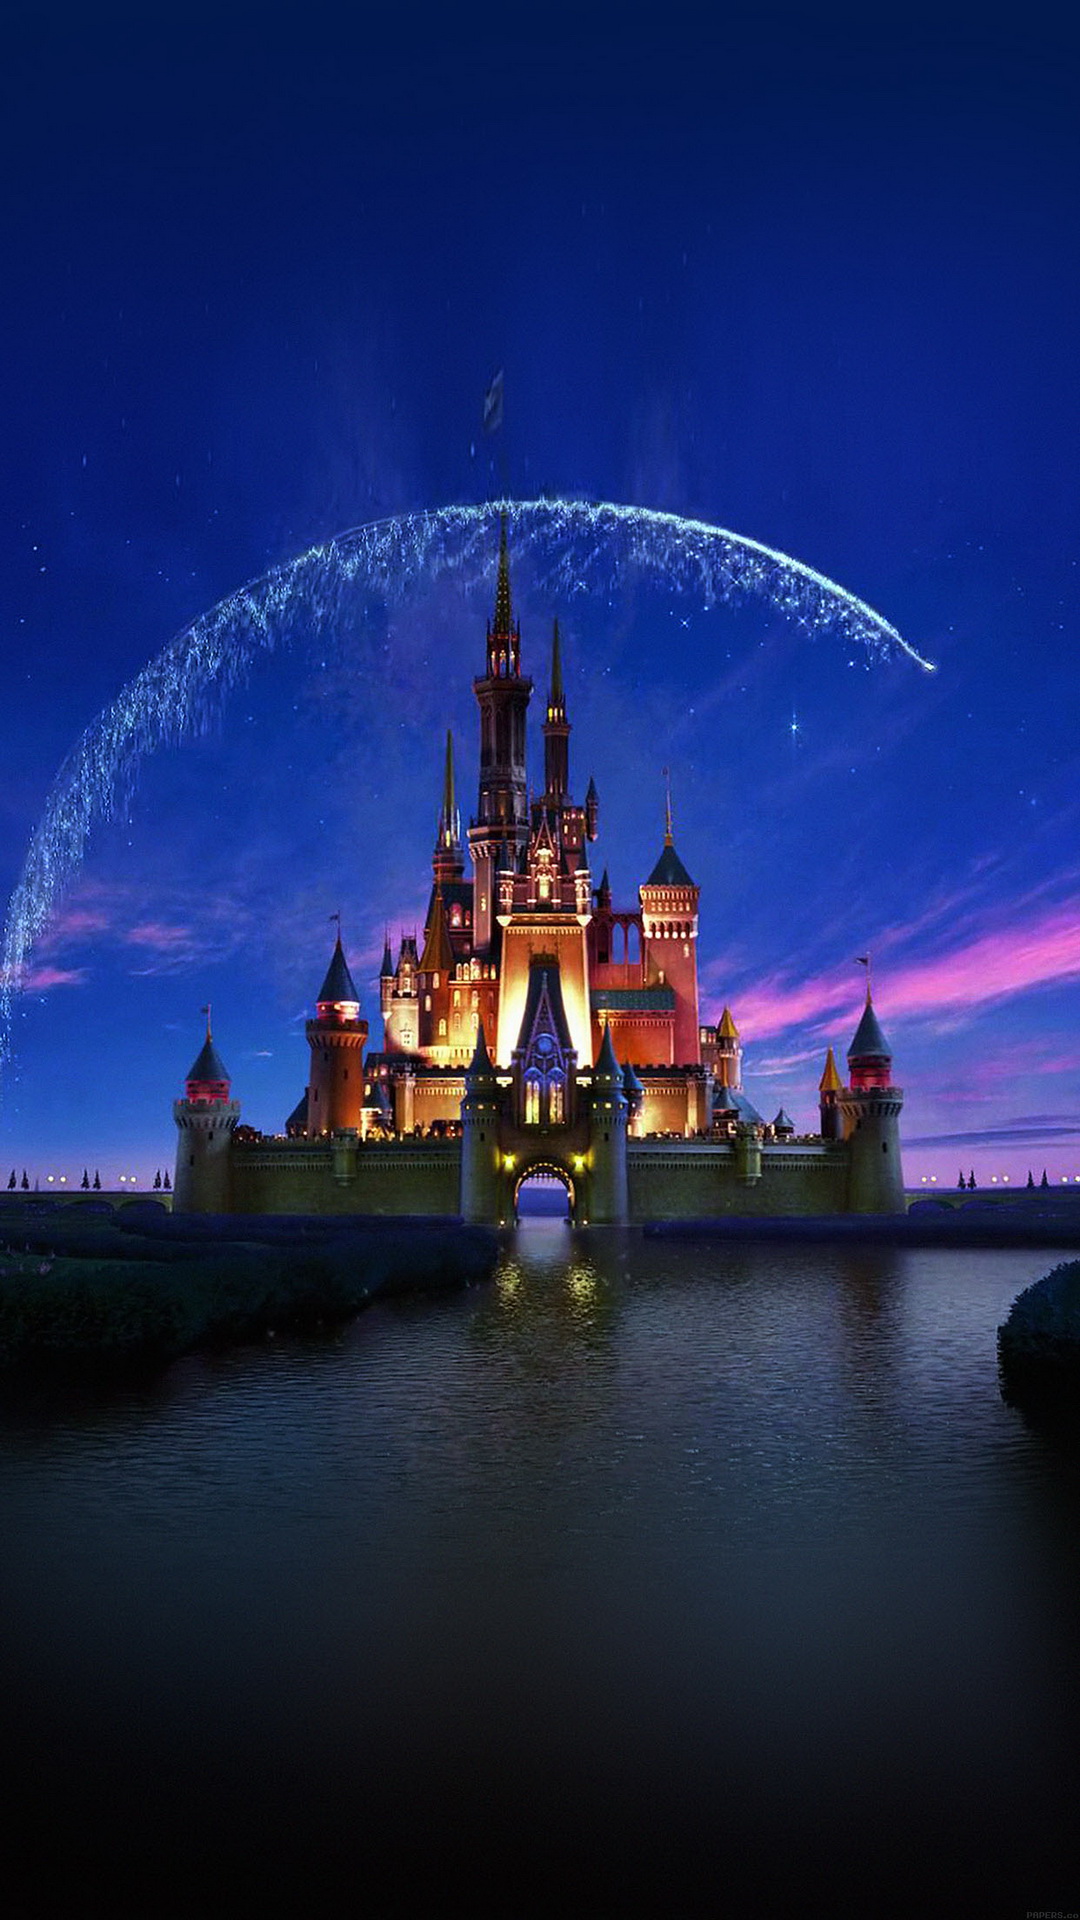 Disney Castle   Top 10 HTC One M9 wallpapers download 1080x1920